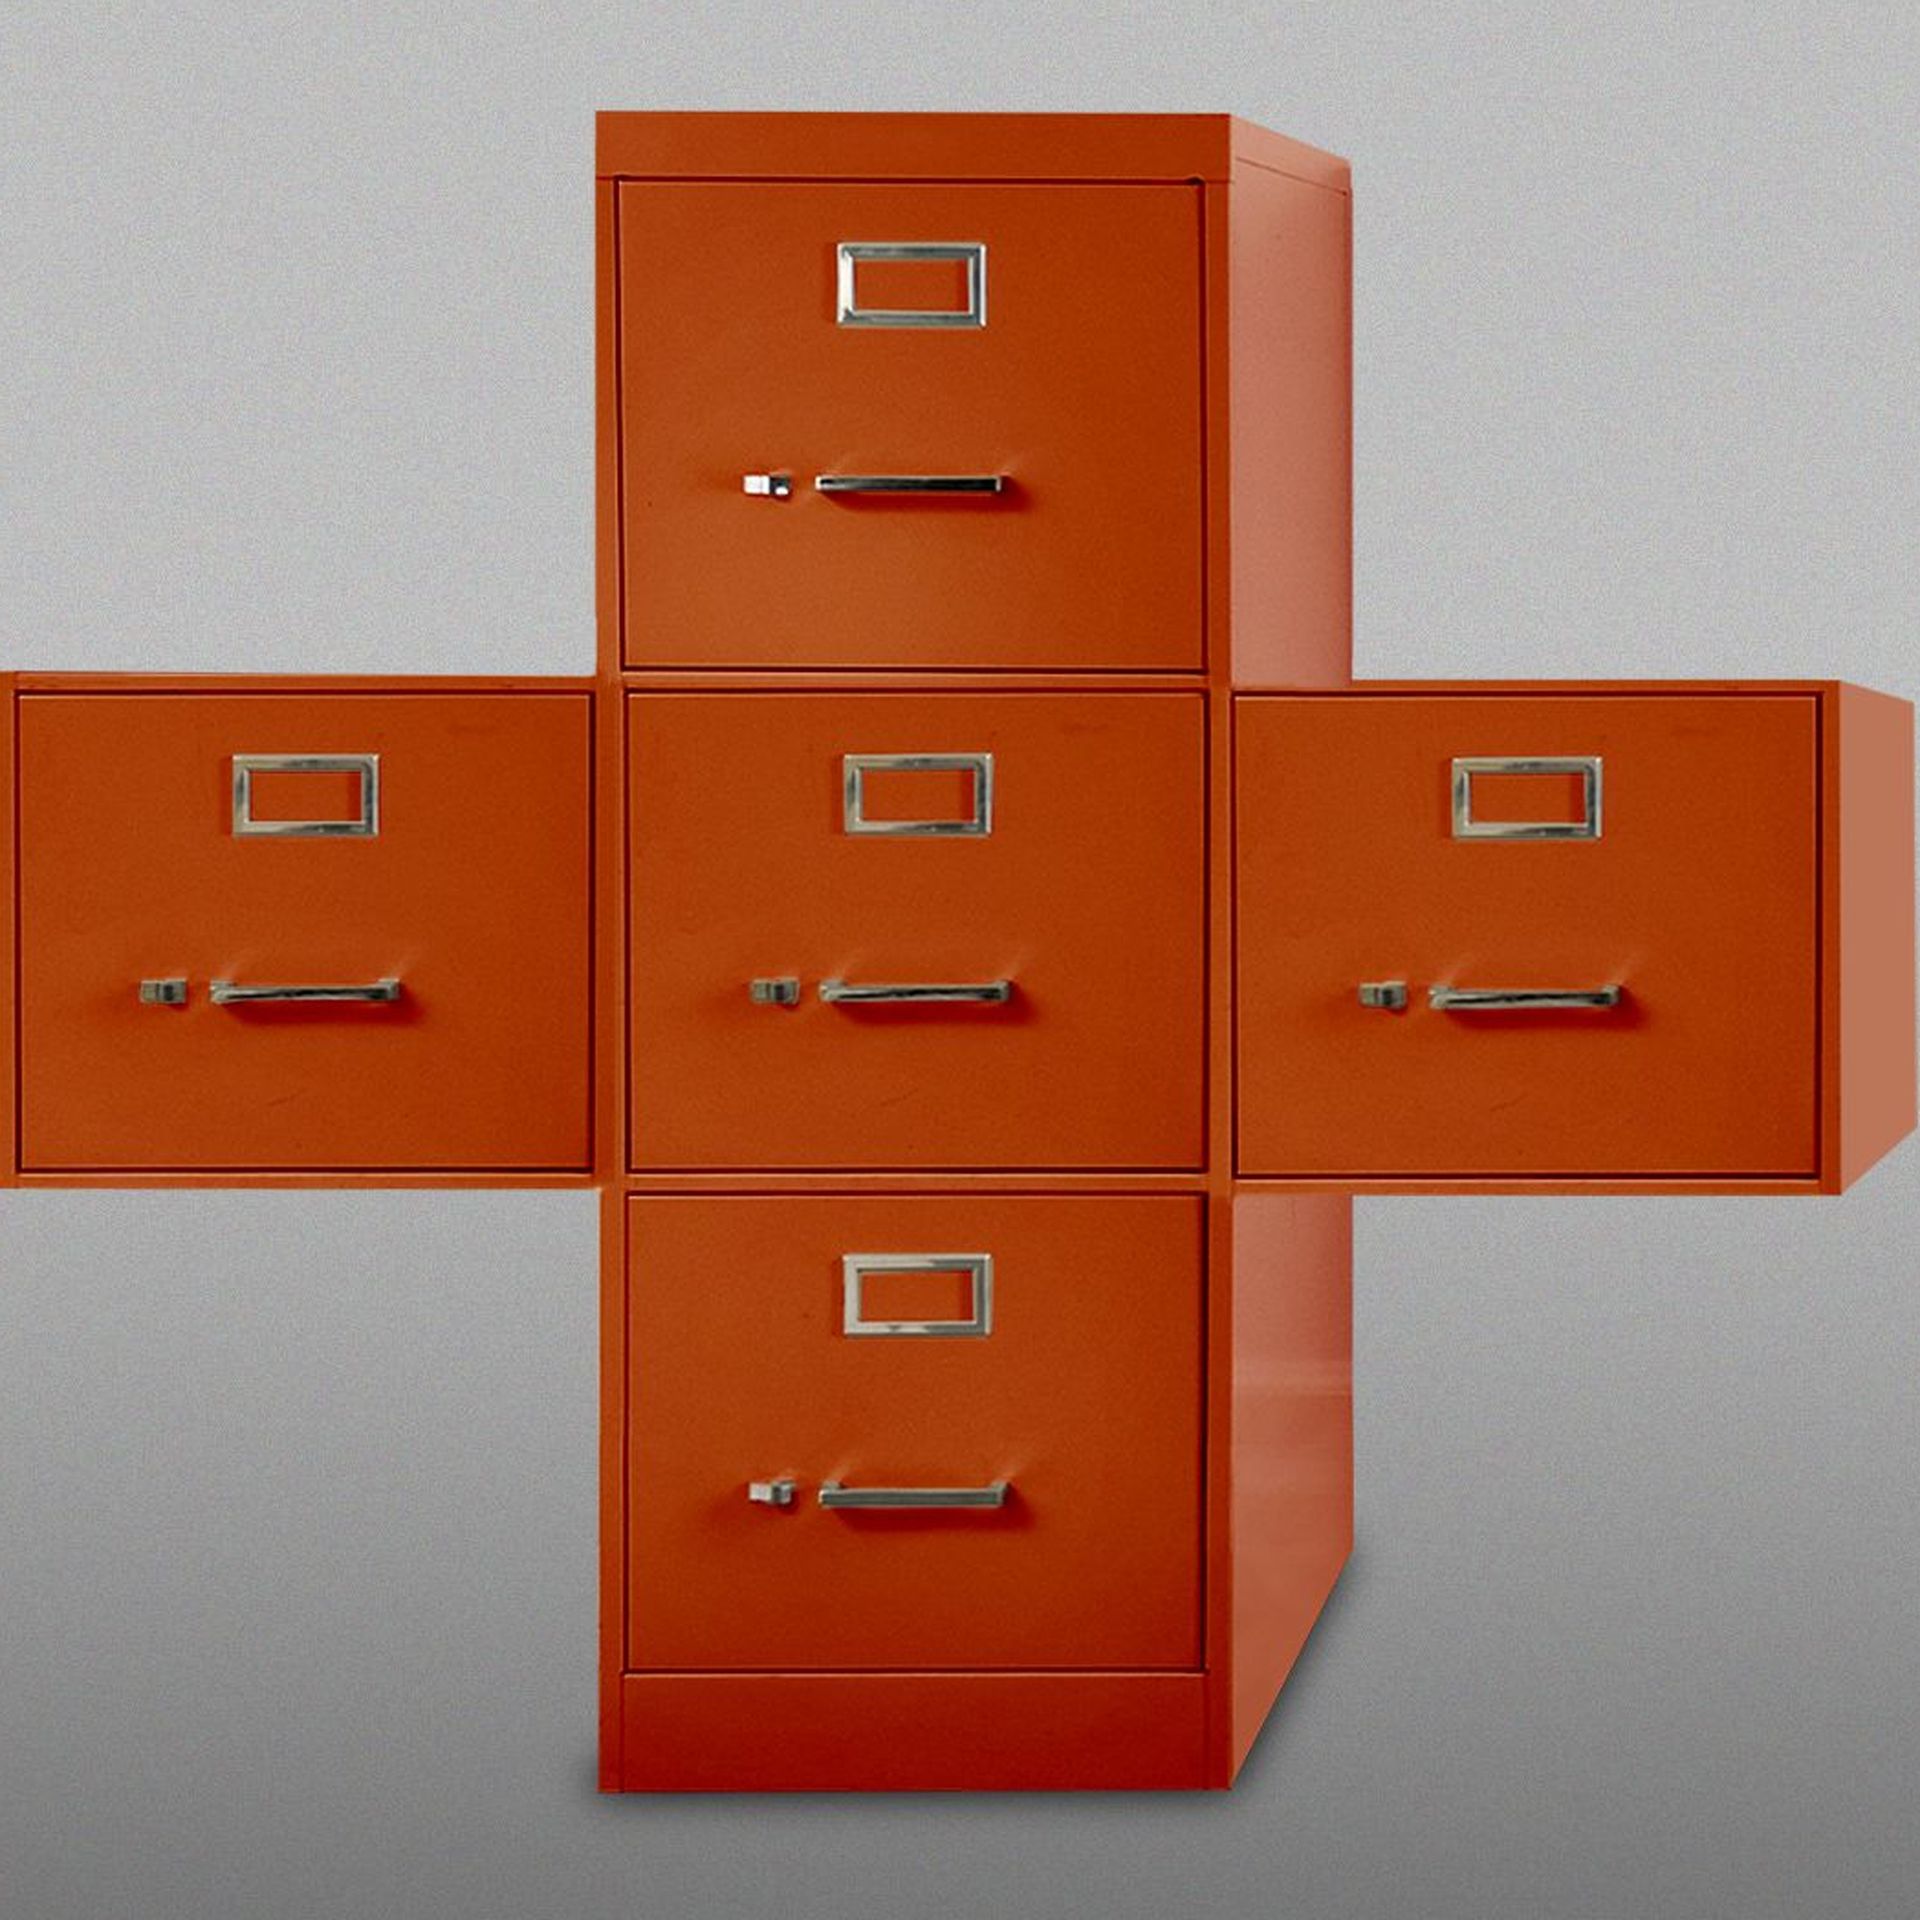 Illustration of a filing cabinet in the shape of a red cross.